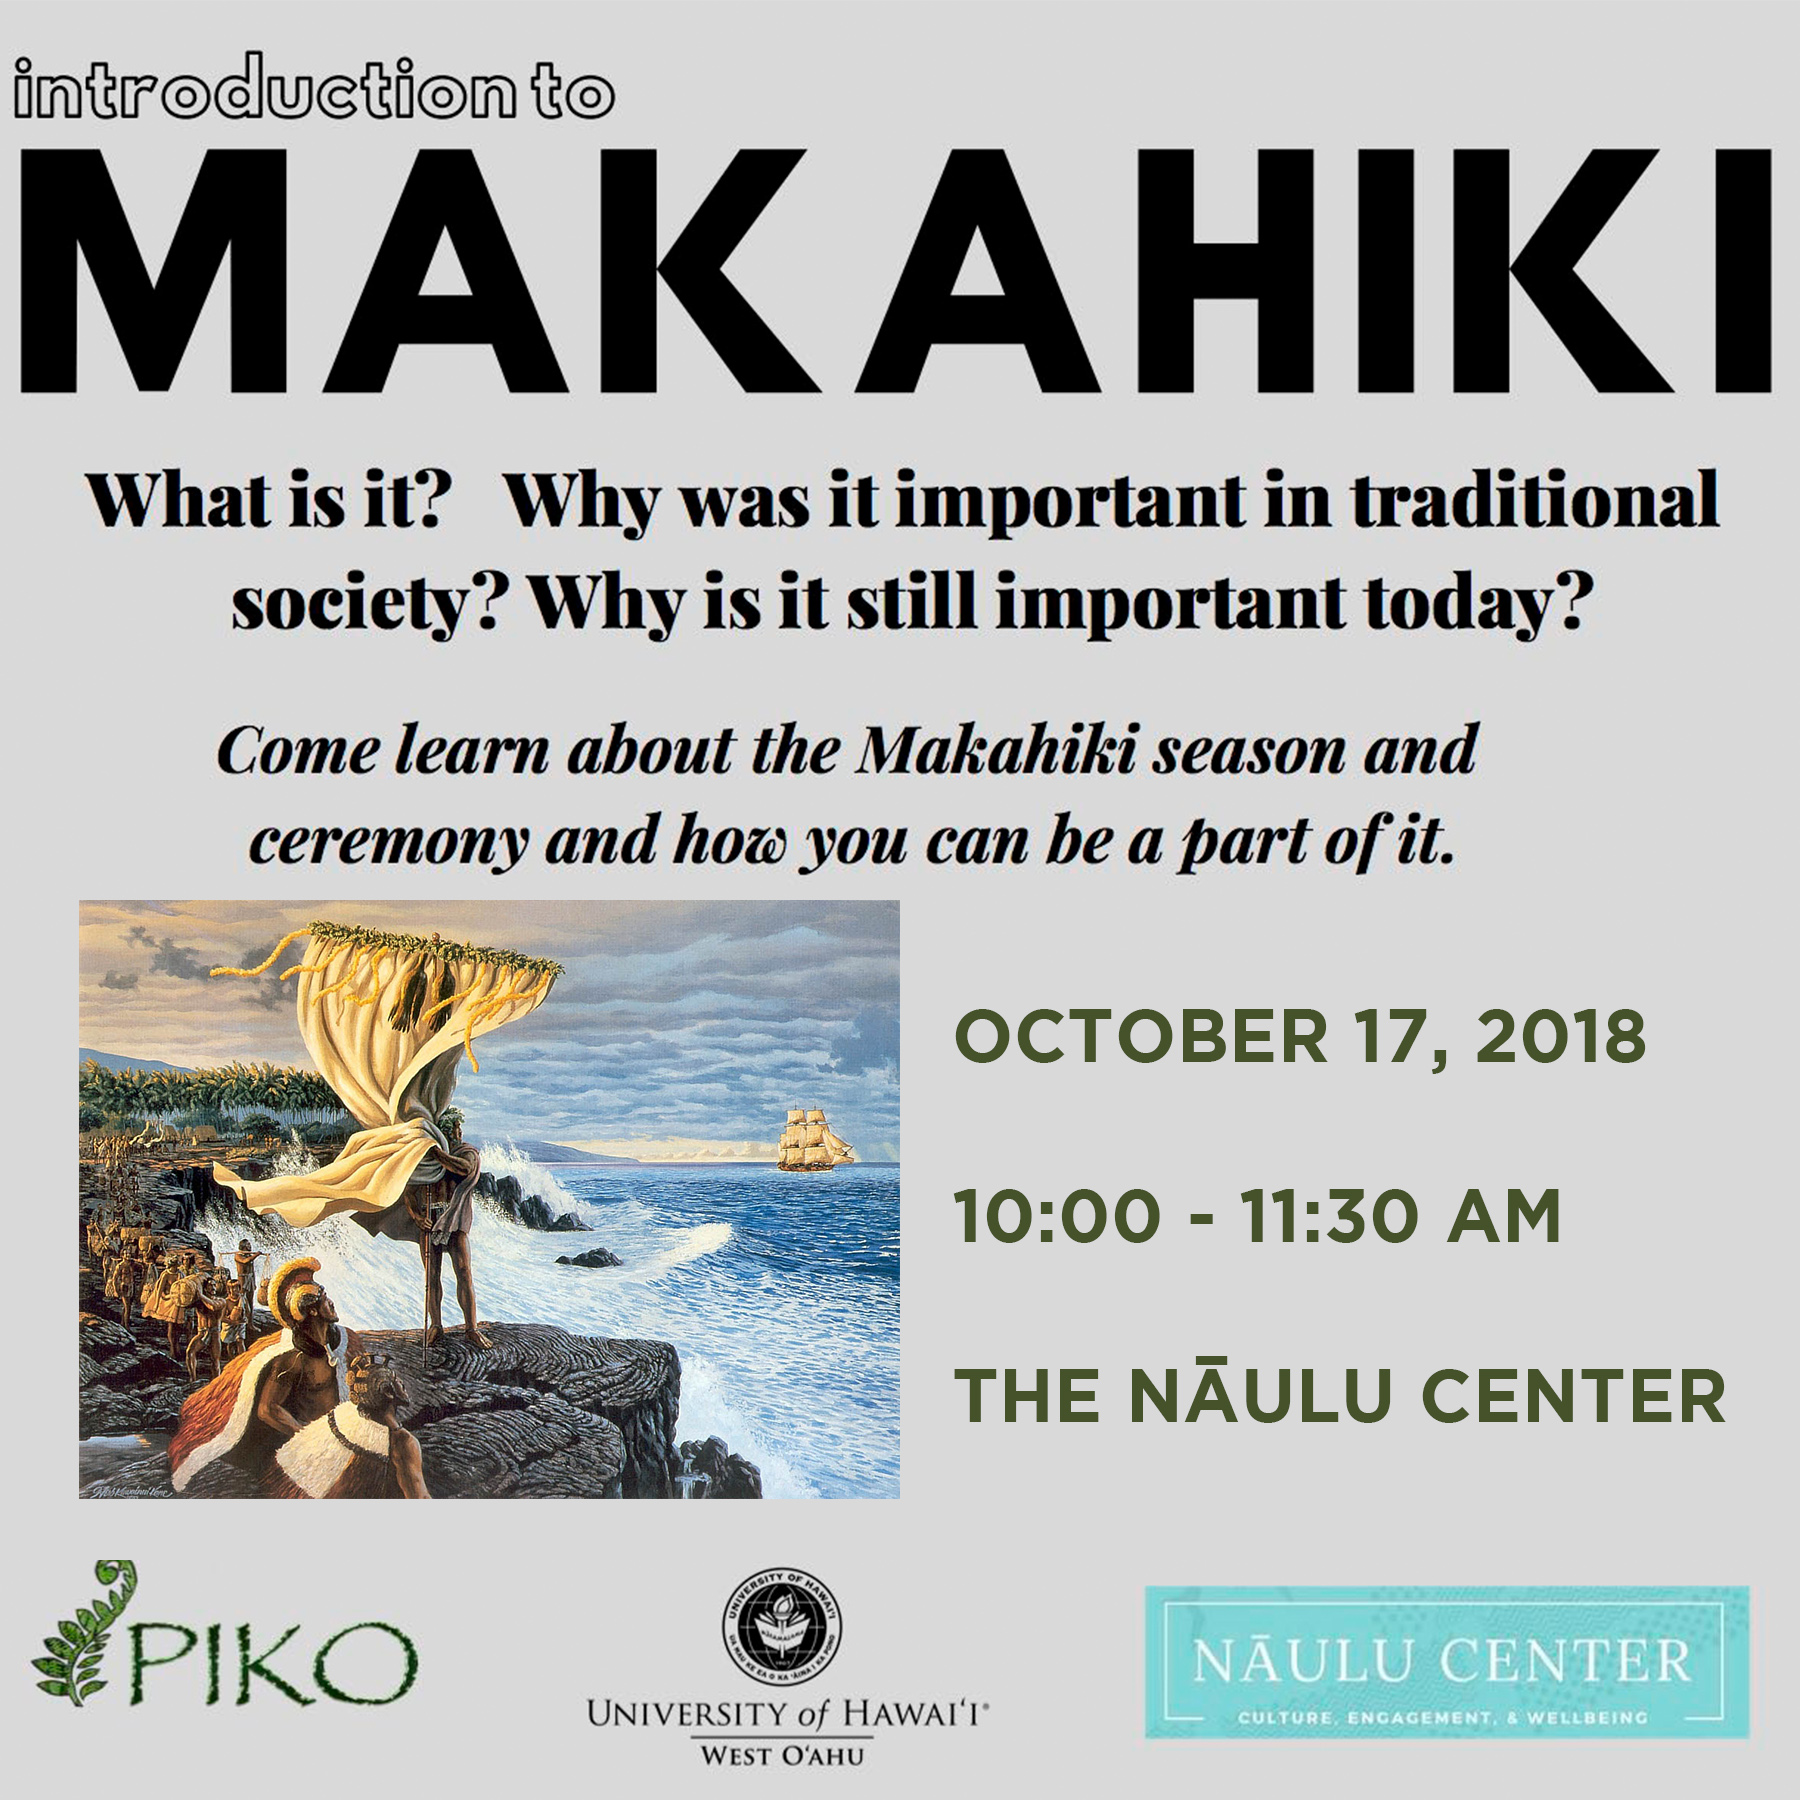 Flier for Makahiki presentation with information that's the same as is presented in the artilce